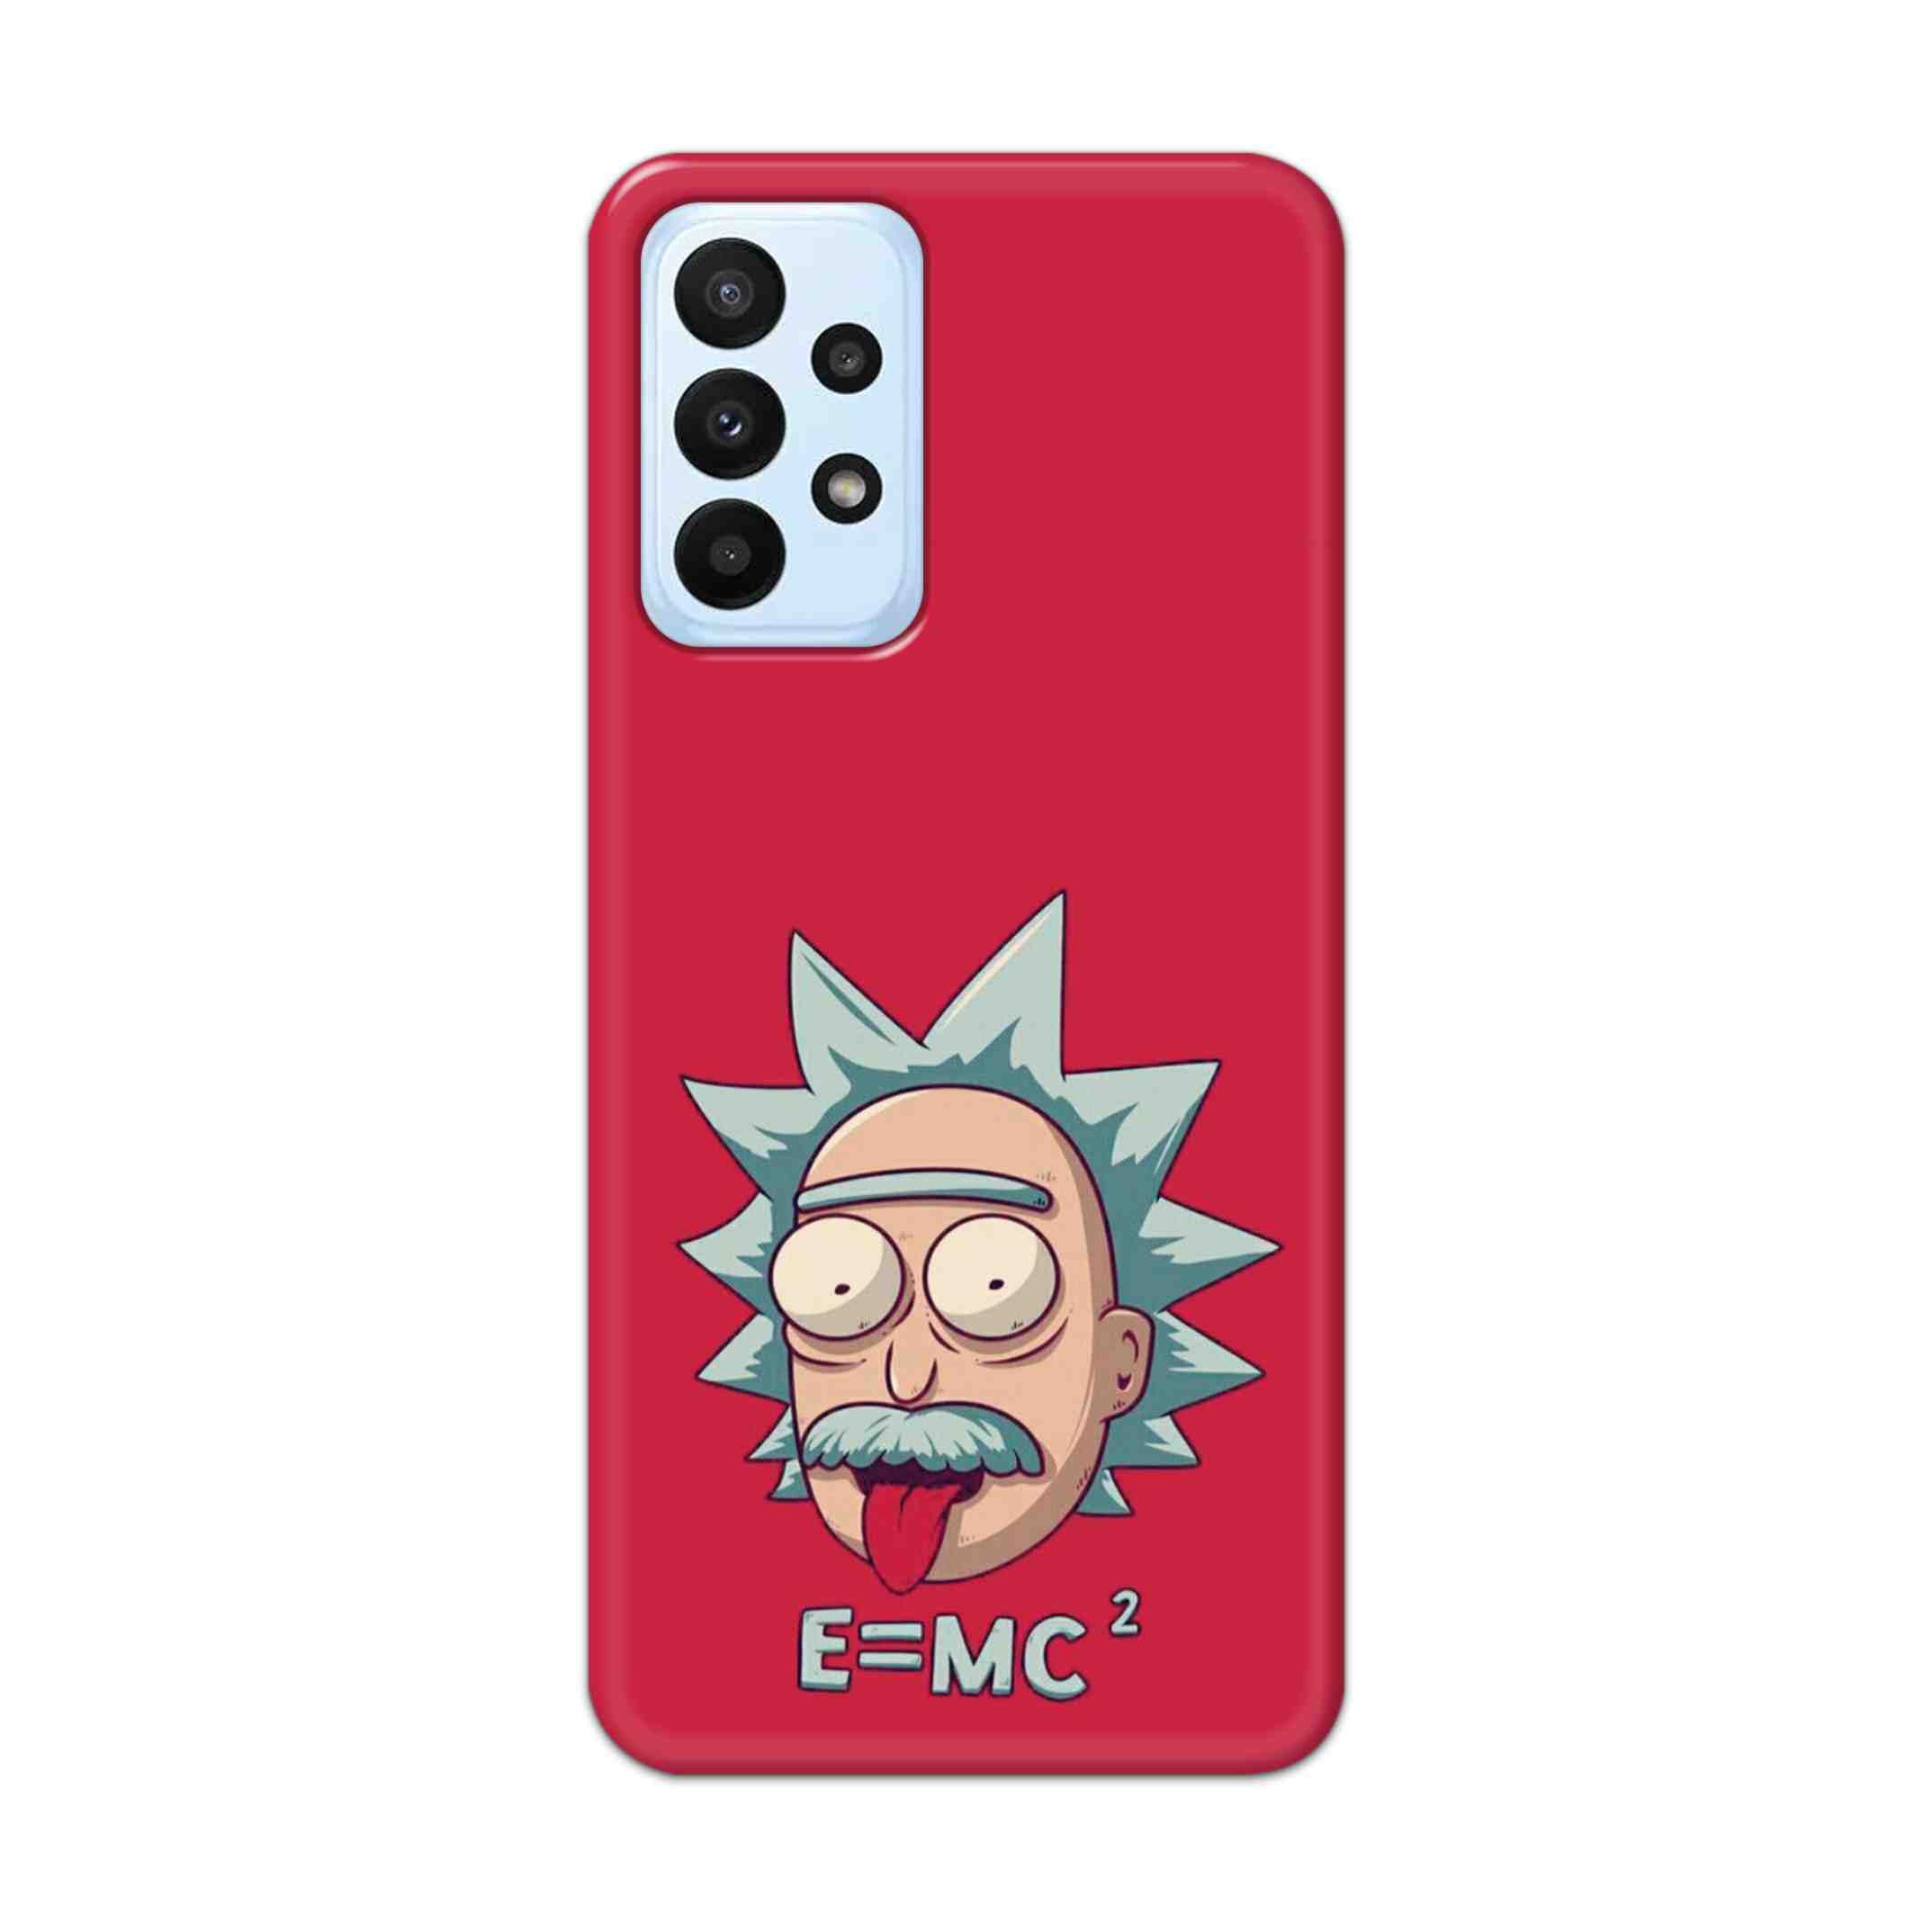 Buy E=Mc Hard Back Mobile Phone Case Cover For Samsung A23 Online